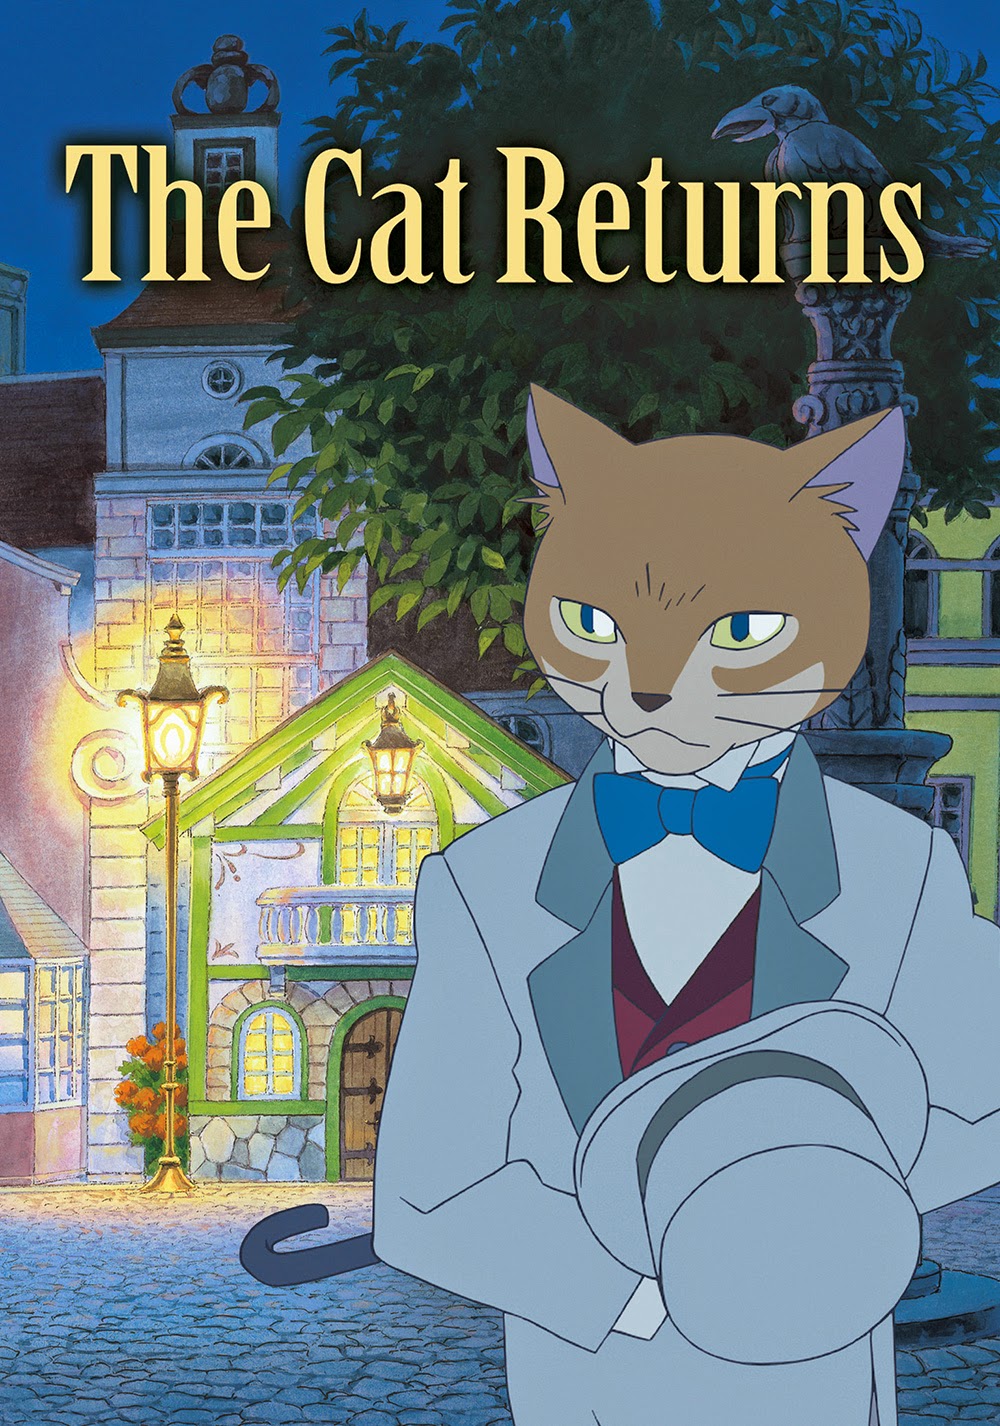 the cat returns song